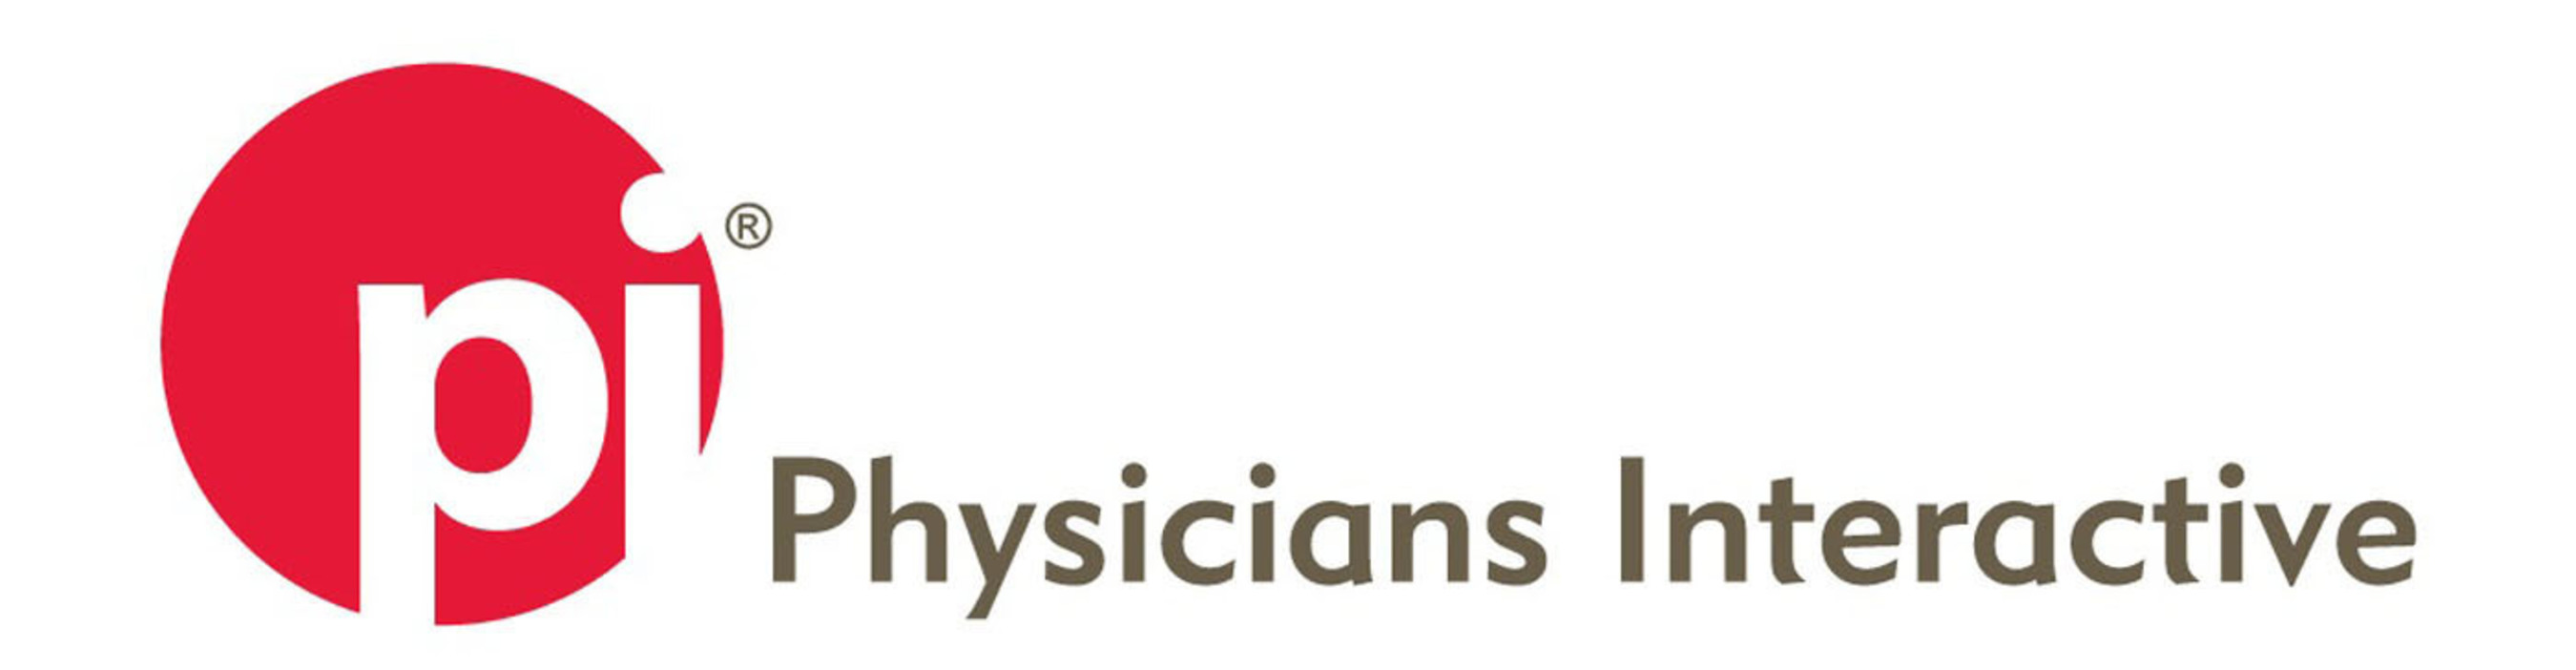 Physicians Interactive aspires to use worldwide networks of healthcare professionals and life sciences companies in ways that change the practice and business of medicine for the better. PI offers a low-cost, virtual, multi-channel marketing approach that supplements currently promoted products, as well as non-promoted and orphaned products. A key focus is services that fit into physicians’ and healthcare professionals’ workflow at the point-of-care. www.PhysiciansInteractive.com